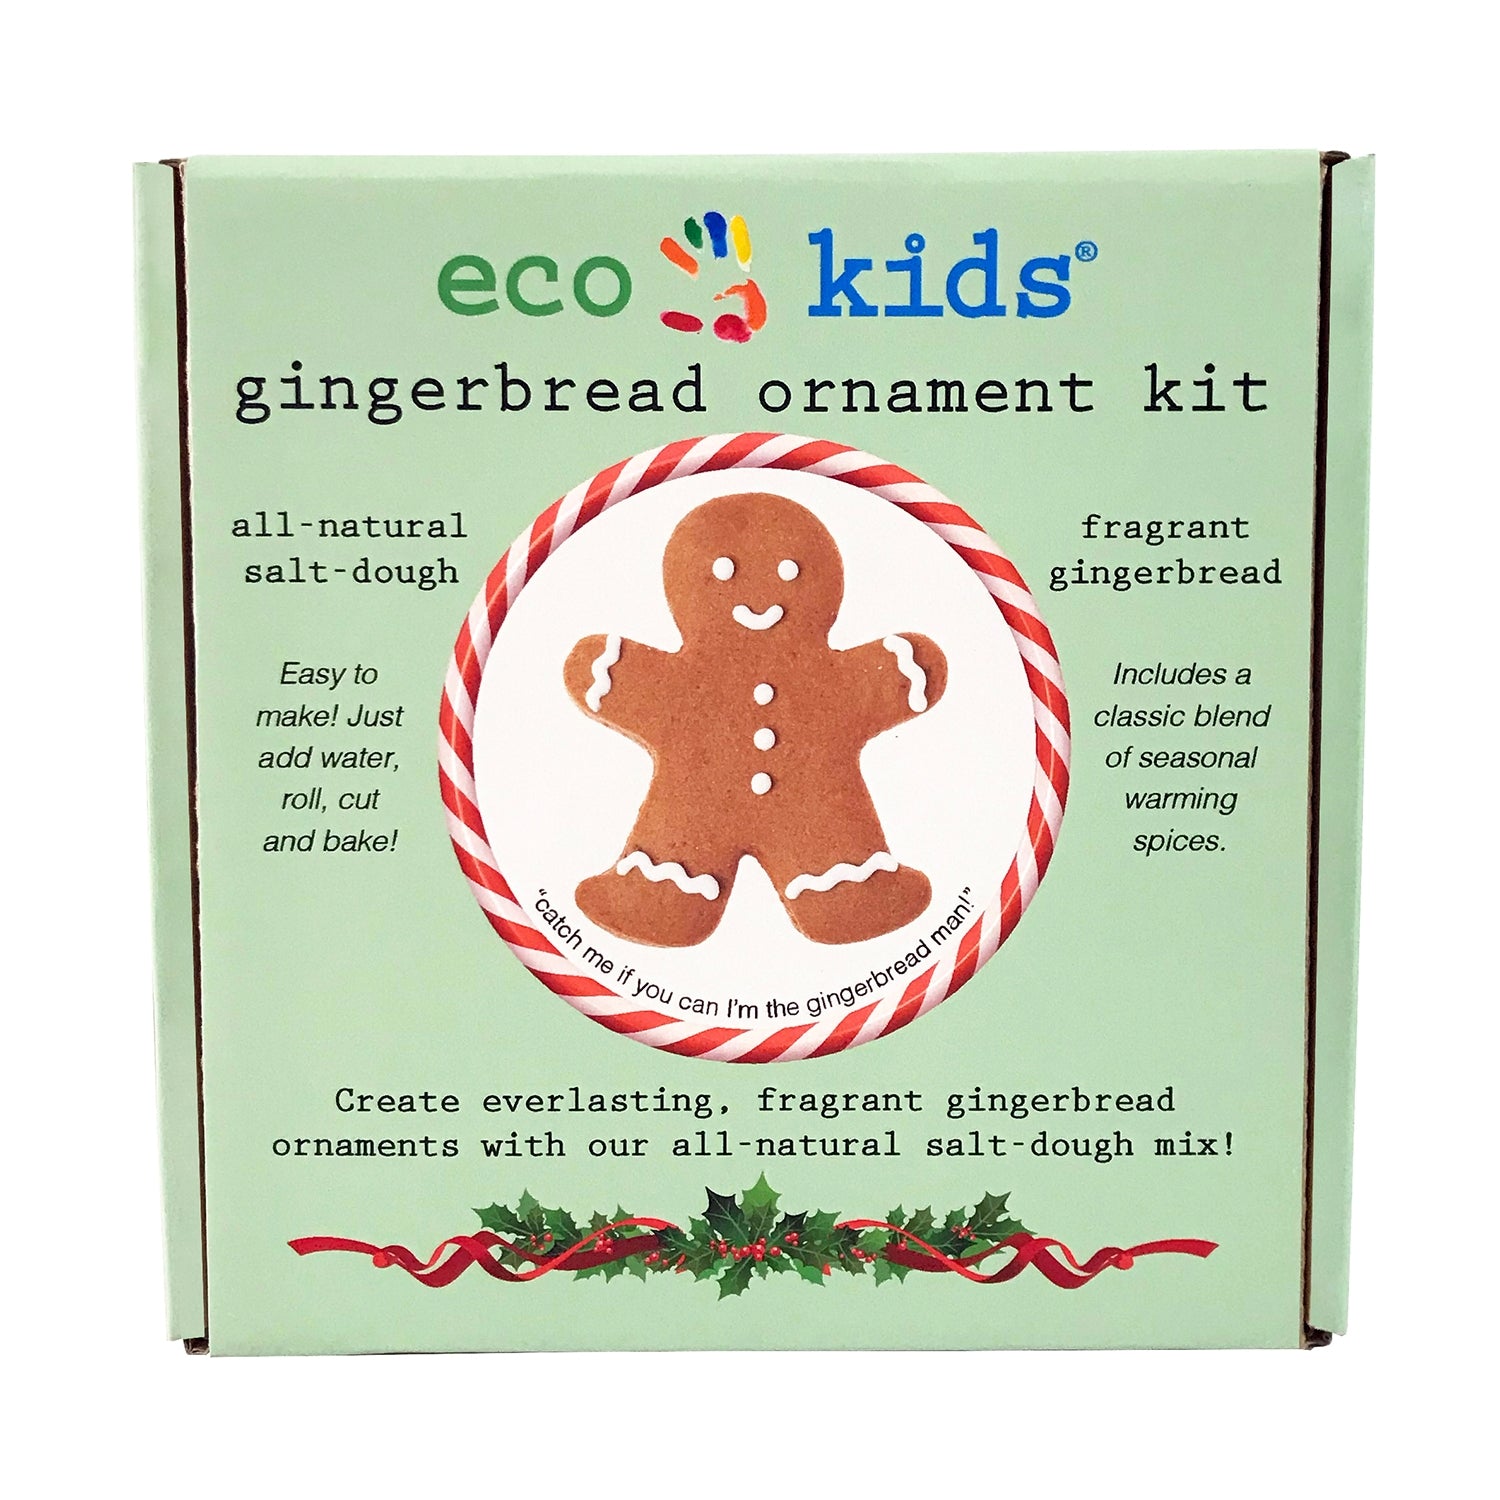 Create everlasting, fragrant gingerbread ornament with our all-natural salt dough mix! Easy to make, just add water, roll, cut and bake! Kit includes: Powdered dough mix (with e all-natural spices in our powdered salt-dough recipe), a gingerbread cookie cutter, a straw hole punch and ribbon.